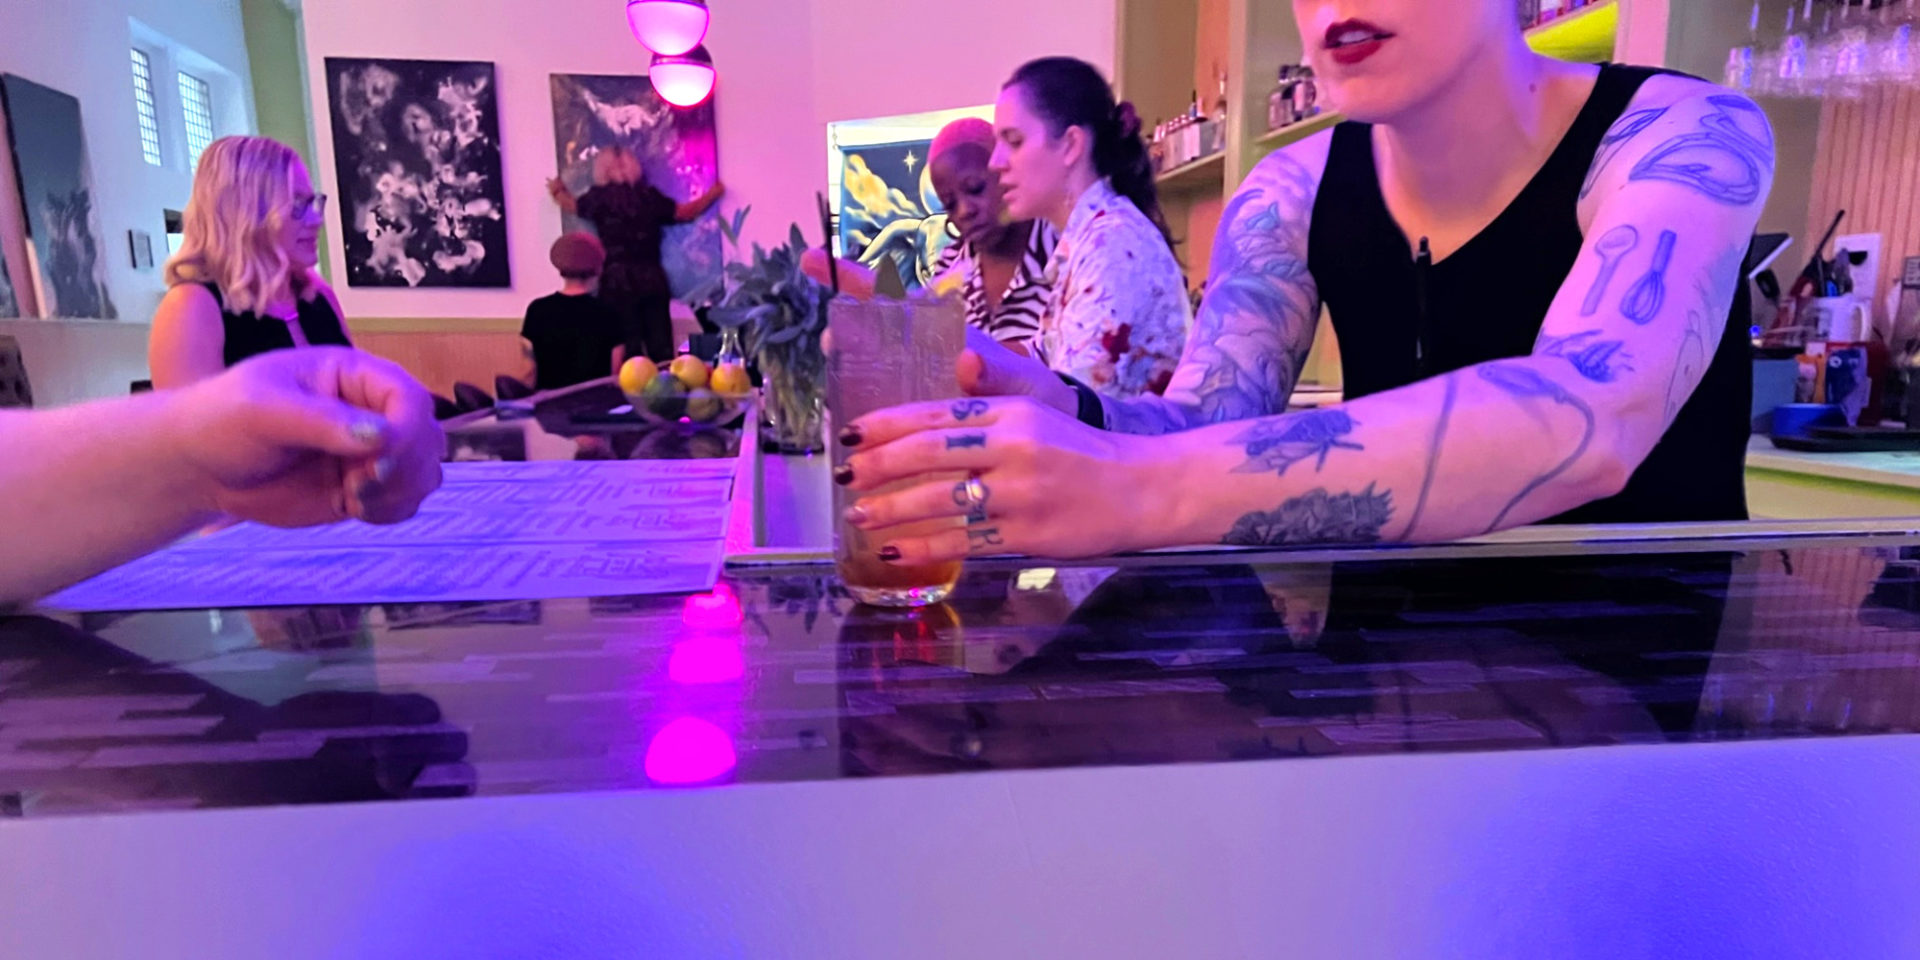 A bartender at Gallery Art Bar serves a mocktail to a white patron on the left. Two other bartenders discuss drinks behind the bar, and in the background an artist hangs her painting on the wall.